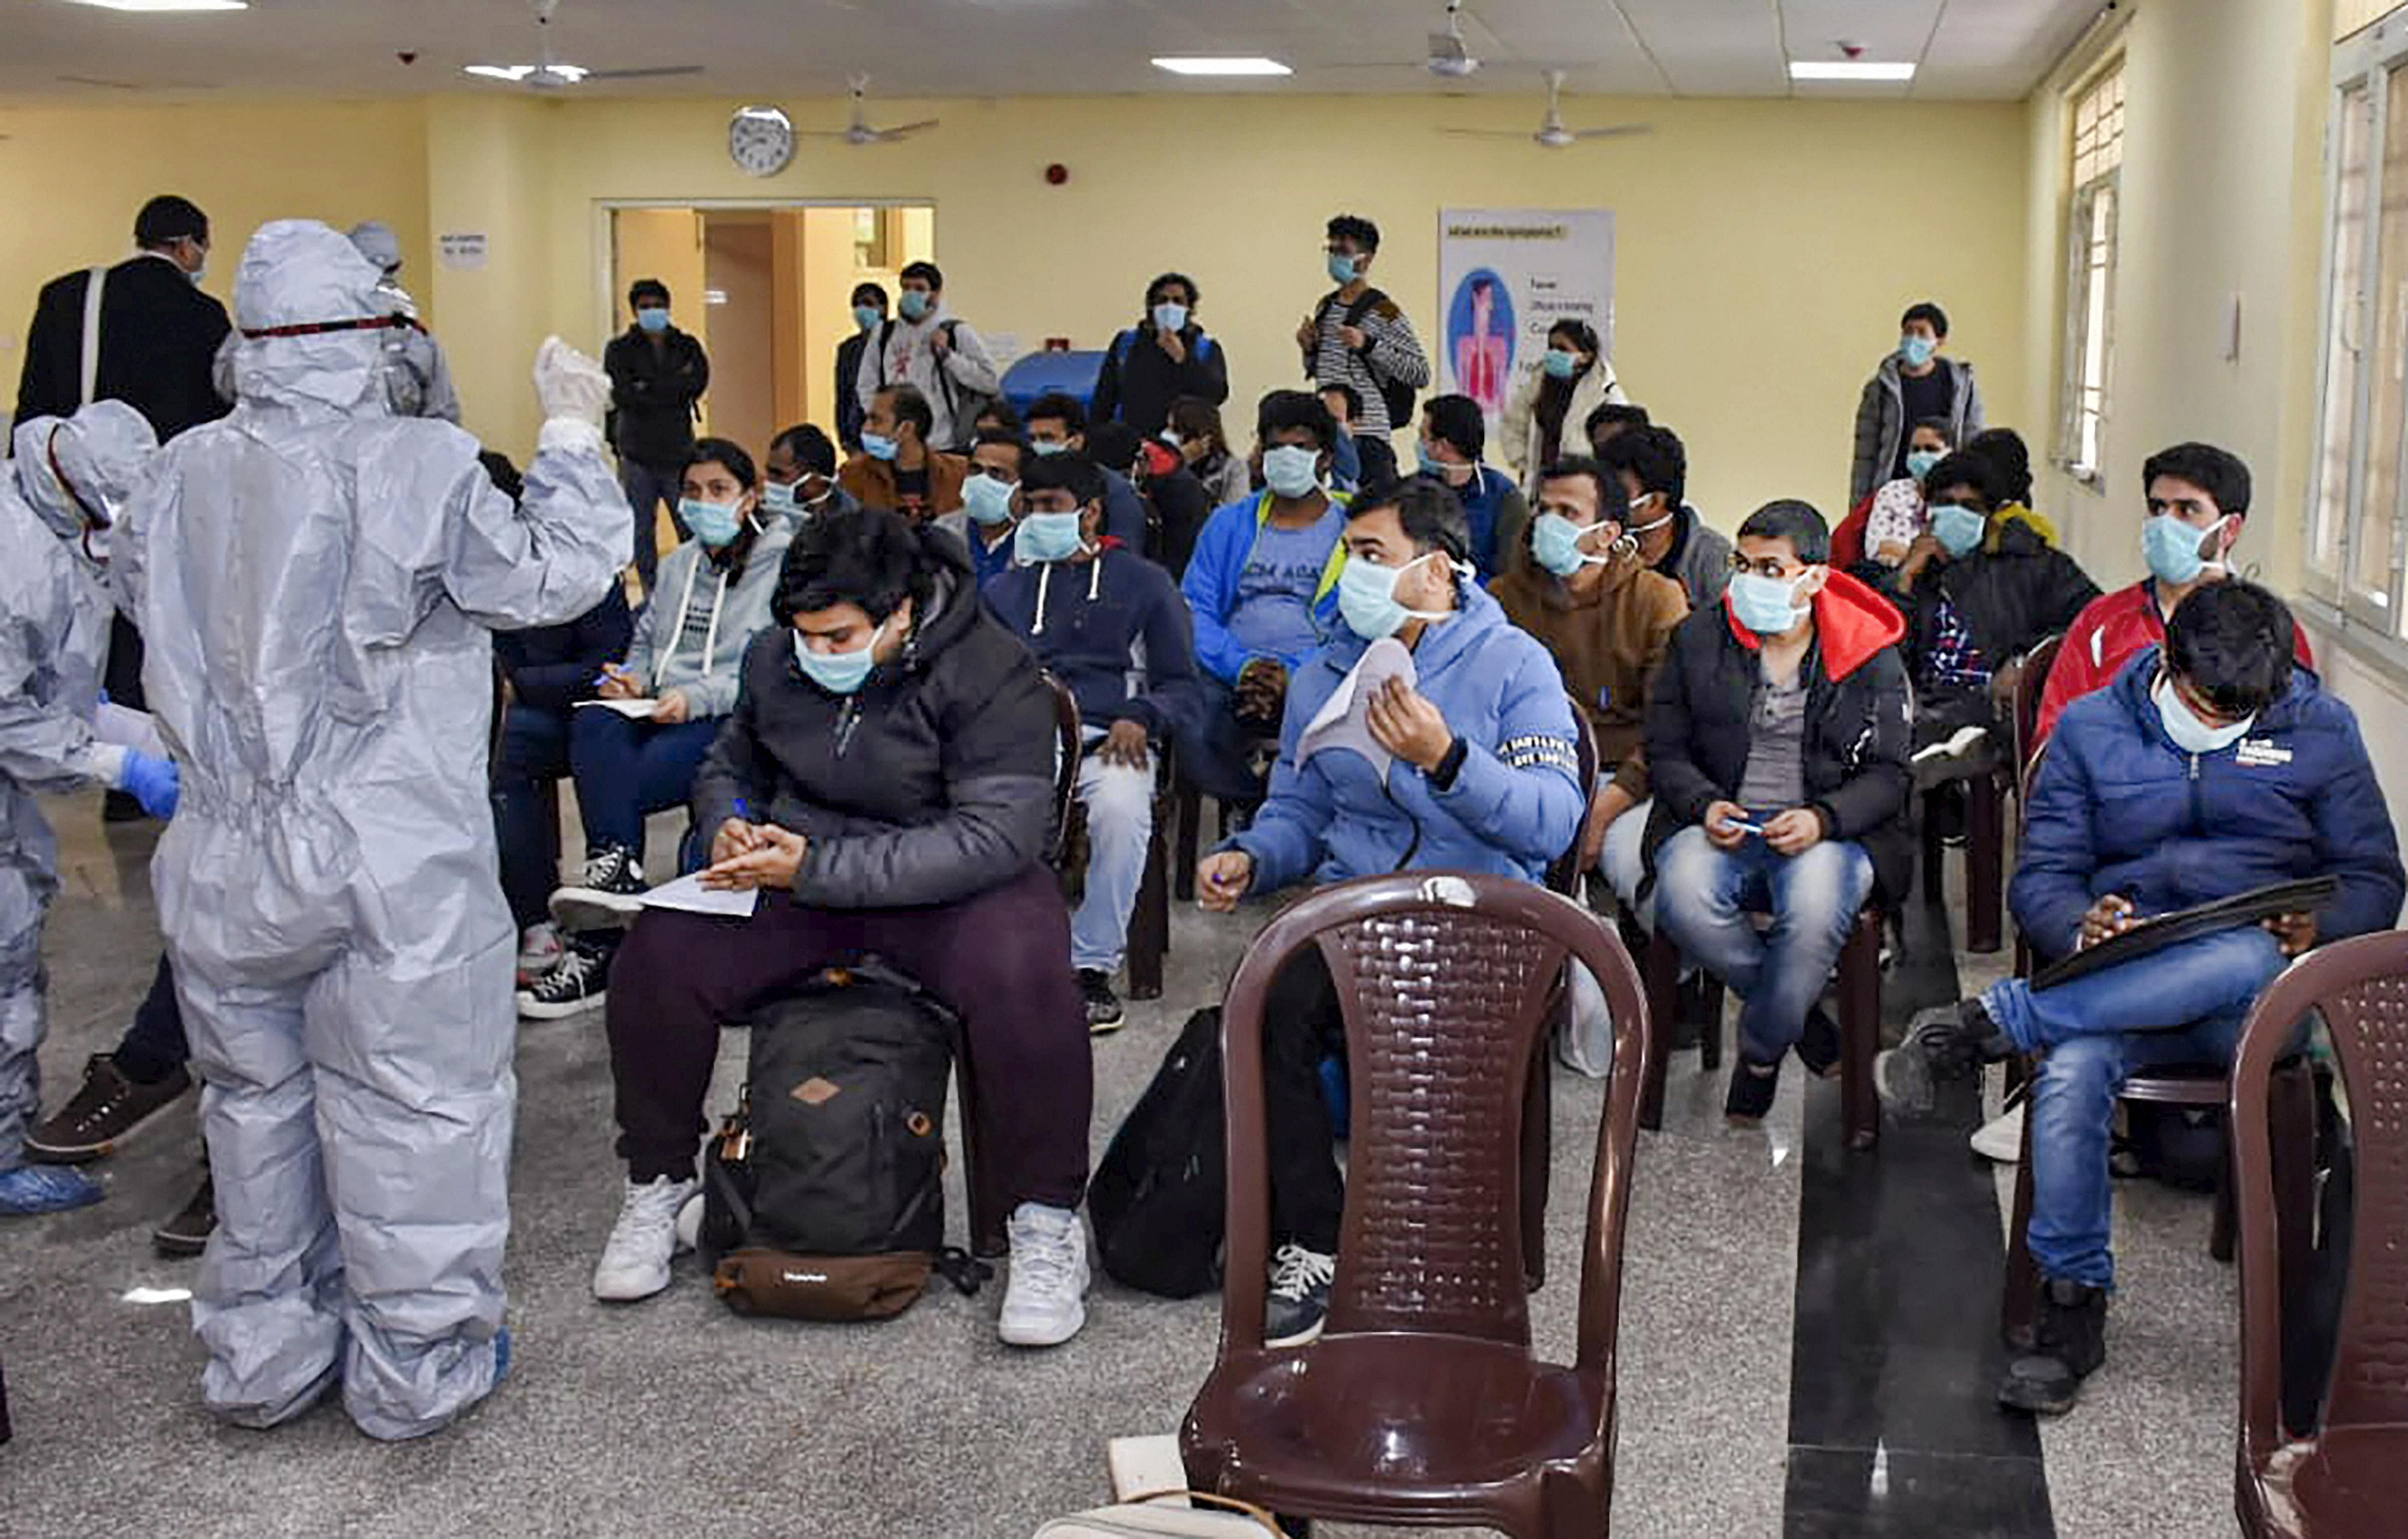 112 evacuees including 36 foreign nationals who were air-lifted from Wuhan, China following out-break of the deadly novel coronavirus, being quarantined by the ITBP Quarantine Facility. (Credit: PTI Photo)